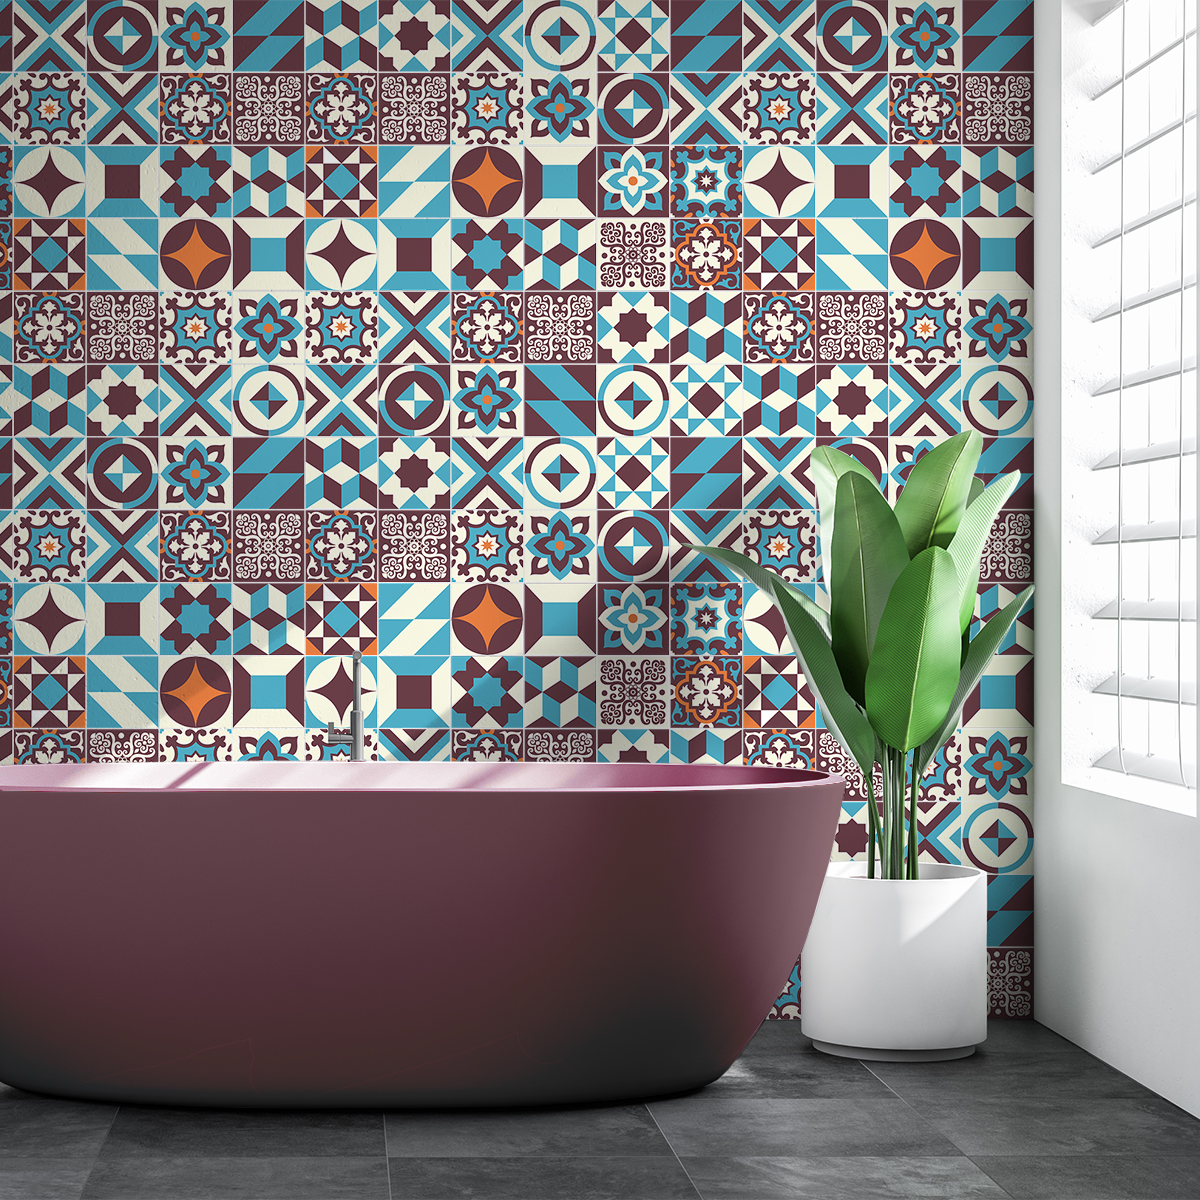 60 wall stickers cement tiles azulejos murzo